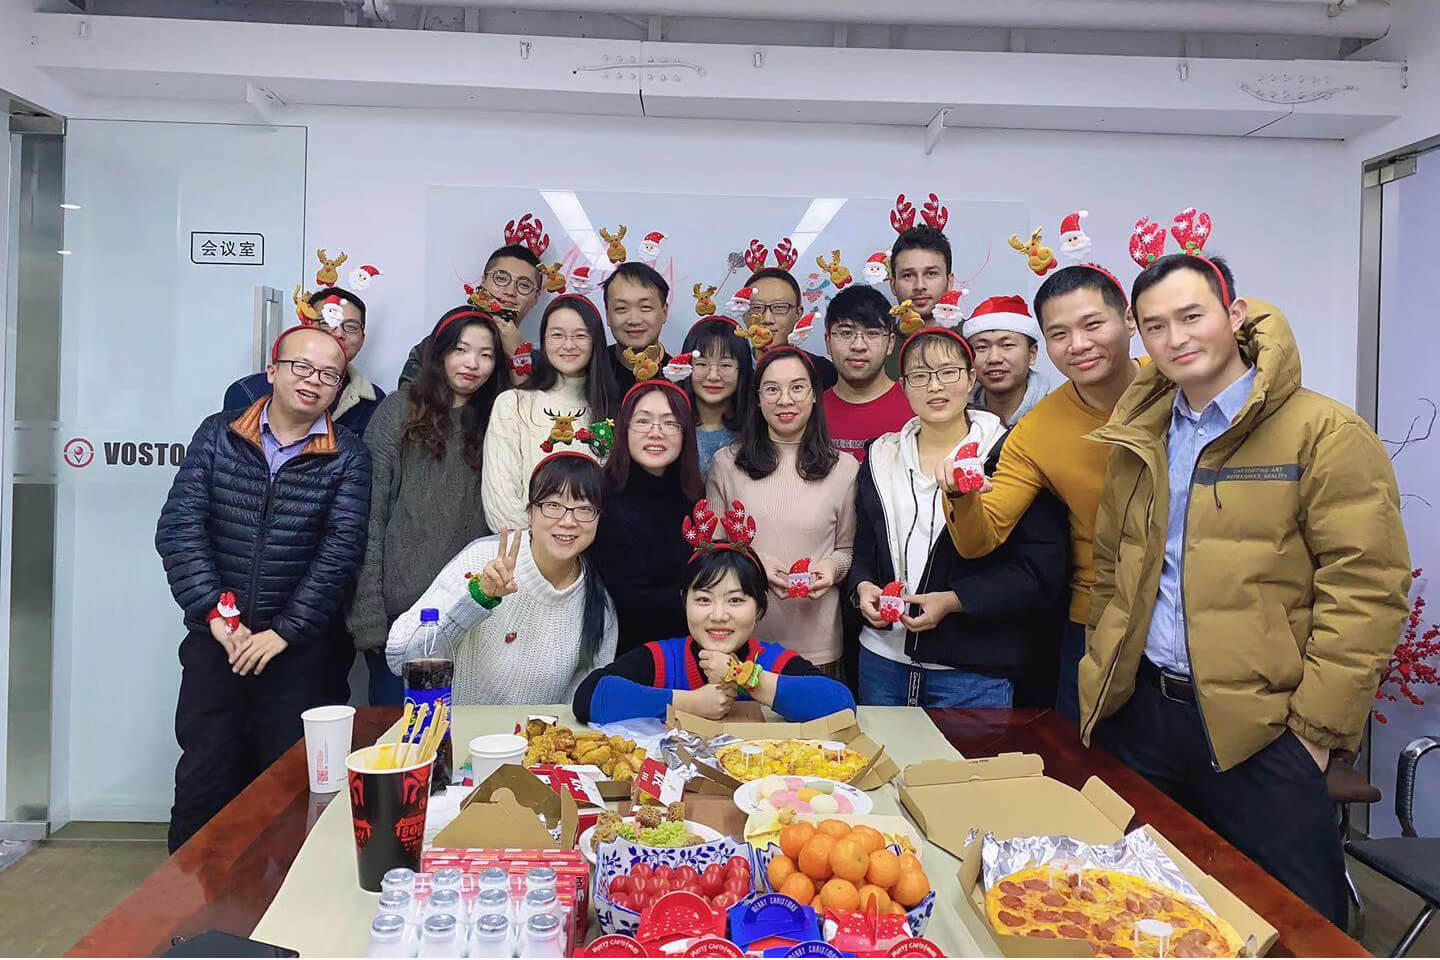 On December 25,2019,our company held a Christmas celebration event. Merry Chritmas!